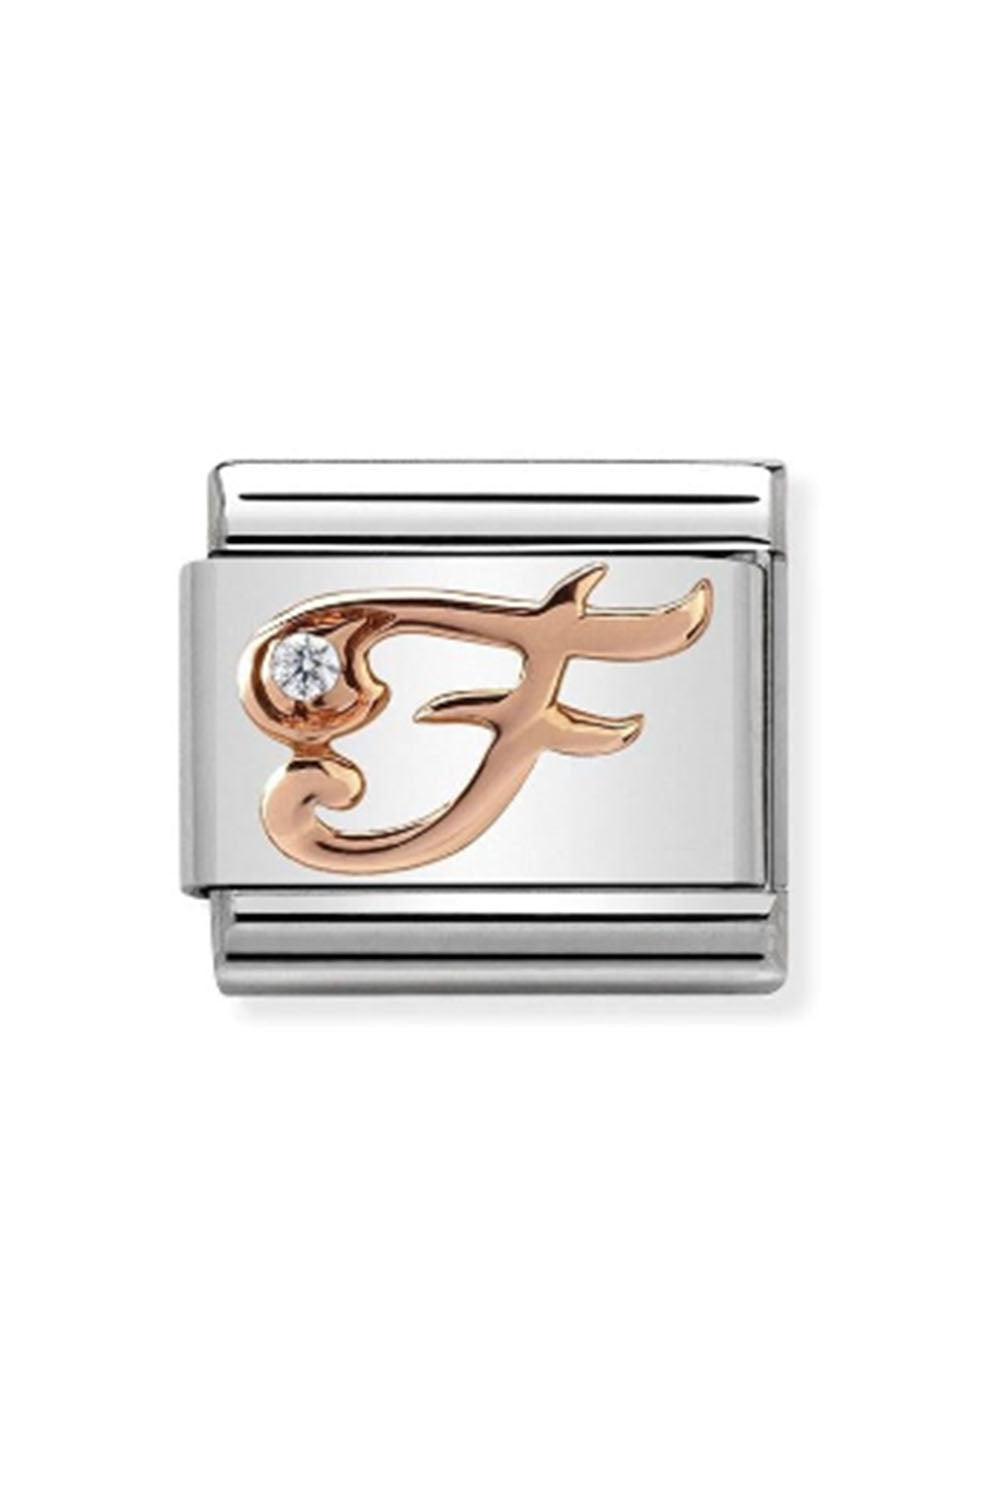 LETTERS 9k rose gold and CZ F